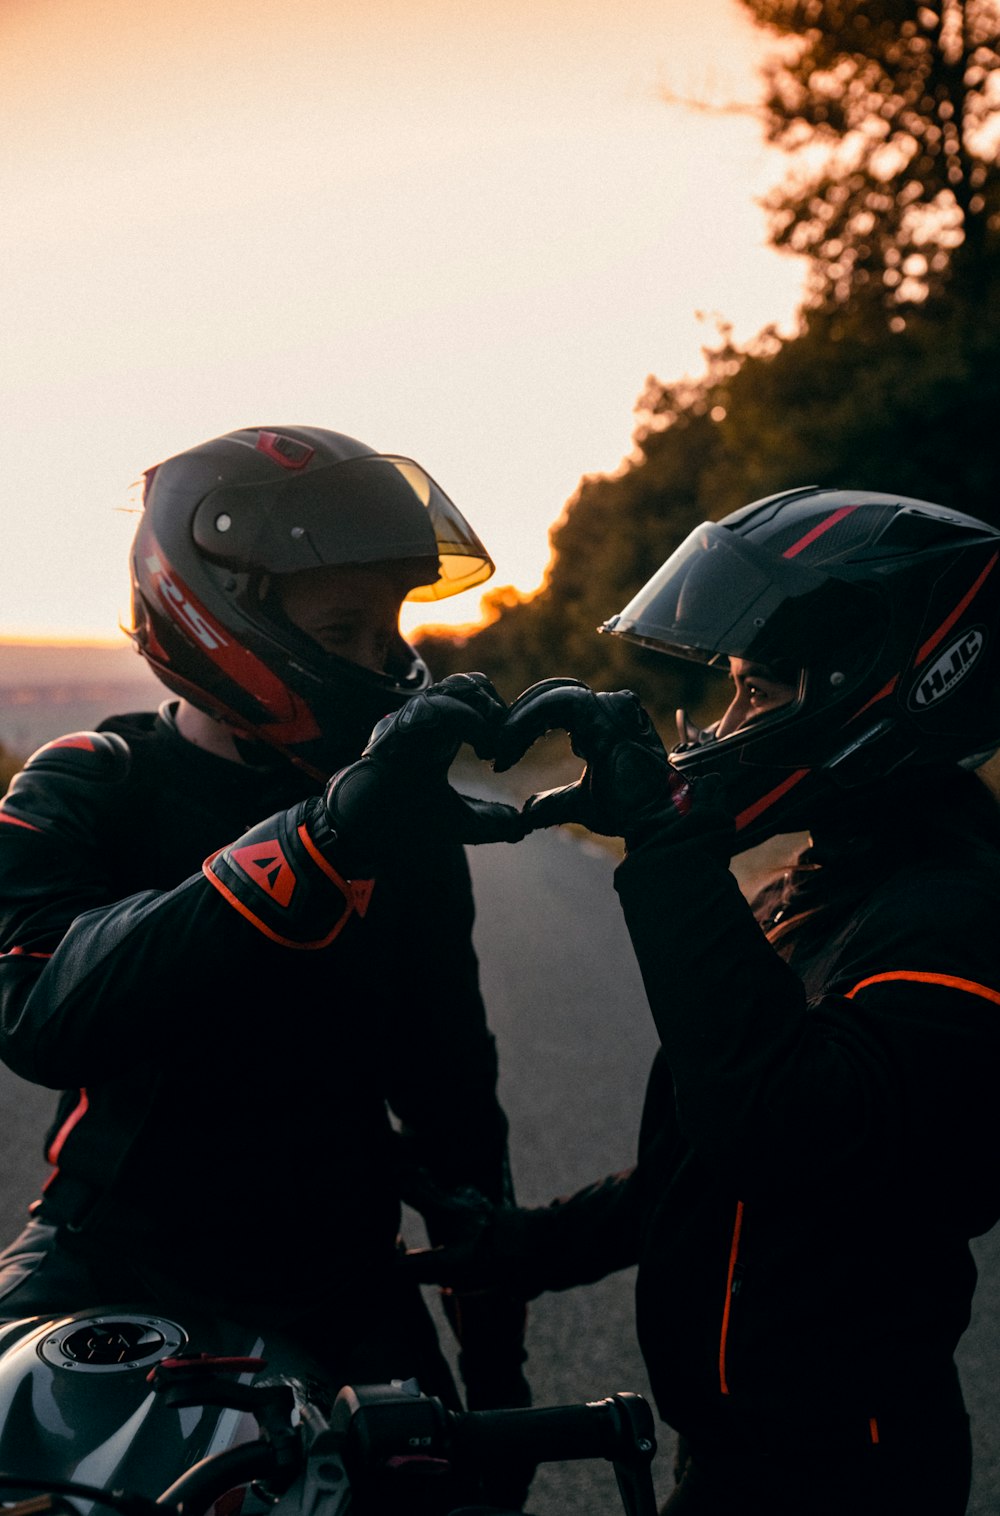 500+ Biker Pictures [HQ] | Download Free Images & Stock Photos on Unsplash